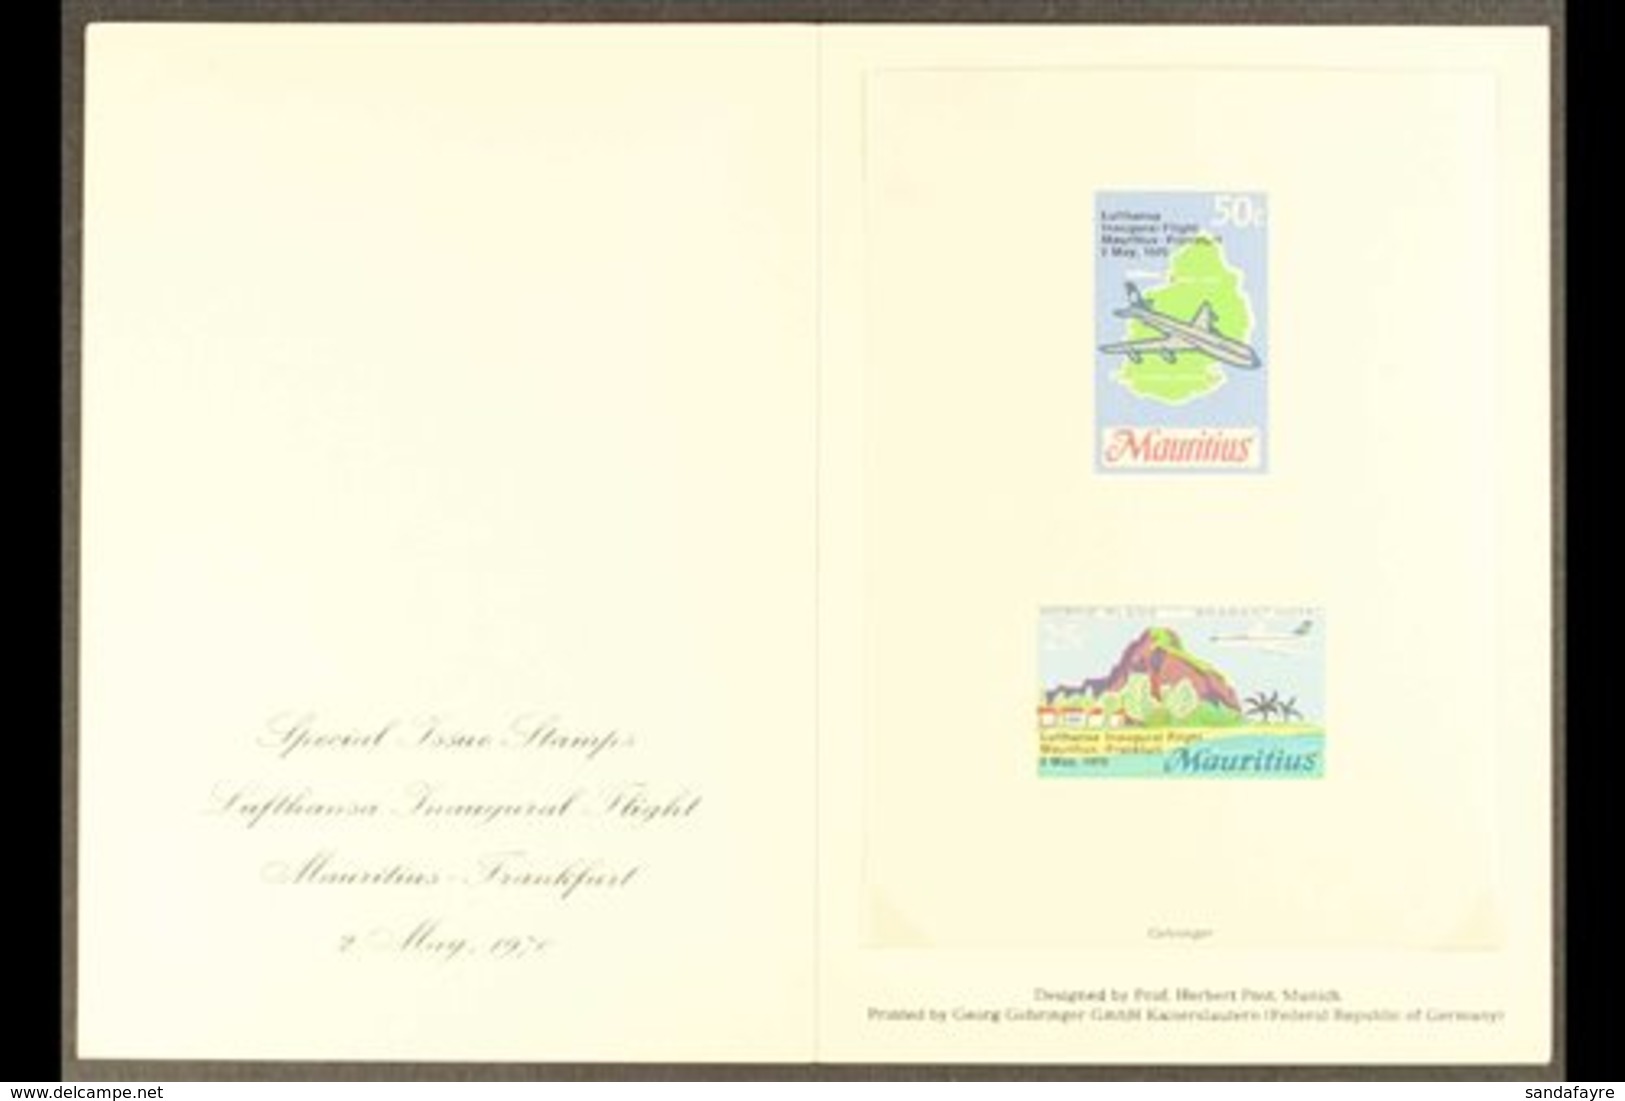 \Y 1970\Y Inauguration Of Lufthansa Flight COMPOSITE IMPERF DIE PROOF (SG 415/16) Printed On Gummed Paper, Never Hinged  - Mauritius (...-1967)